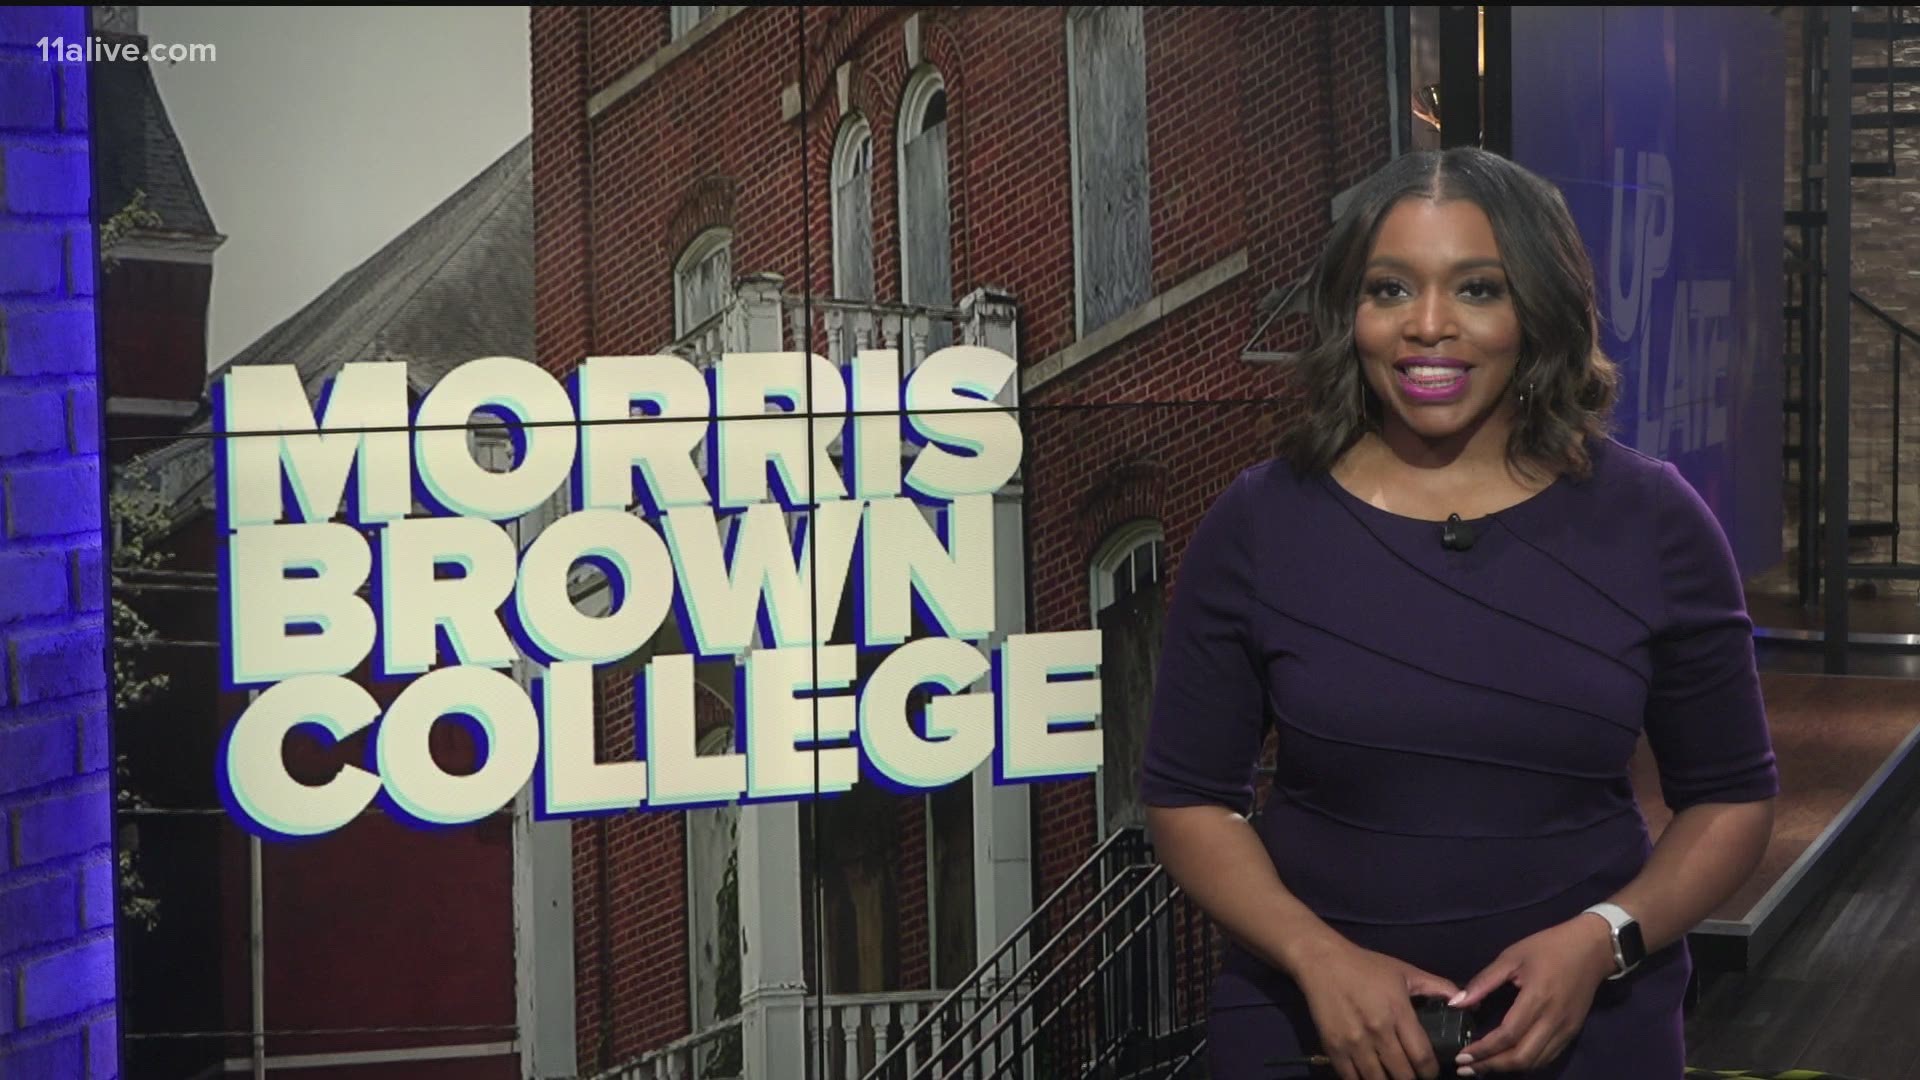 Morris Brown College has received its accreditation candidacy, the school announced Tuesday -- an achievement 20 years in the making.